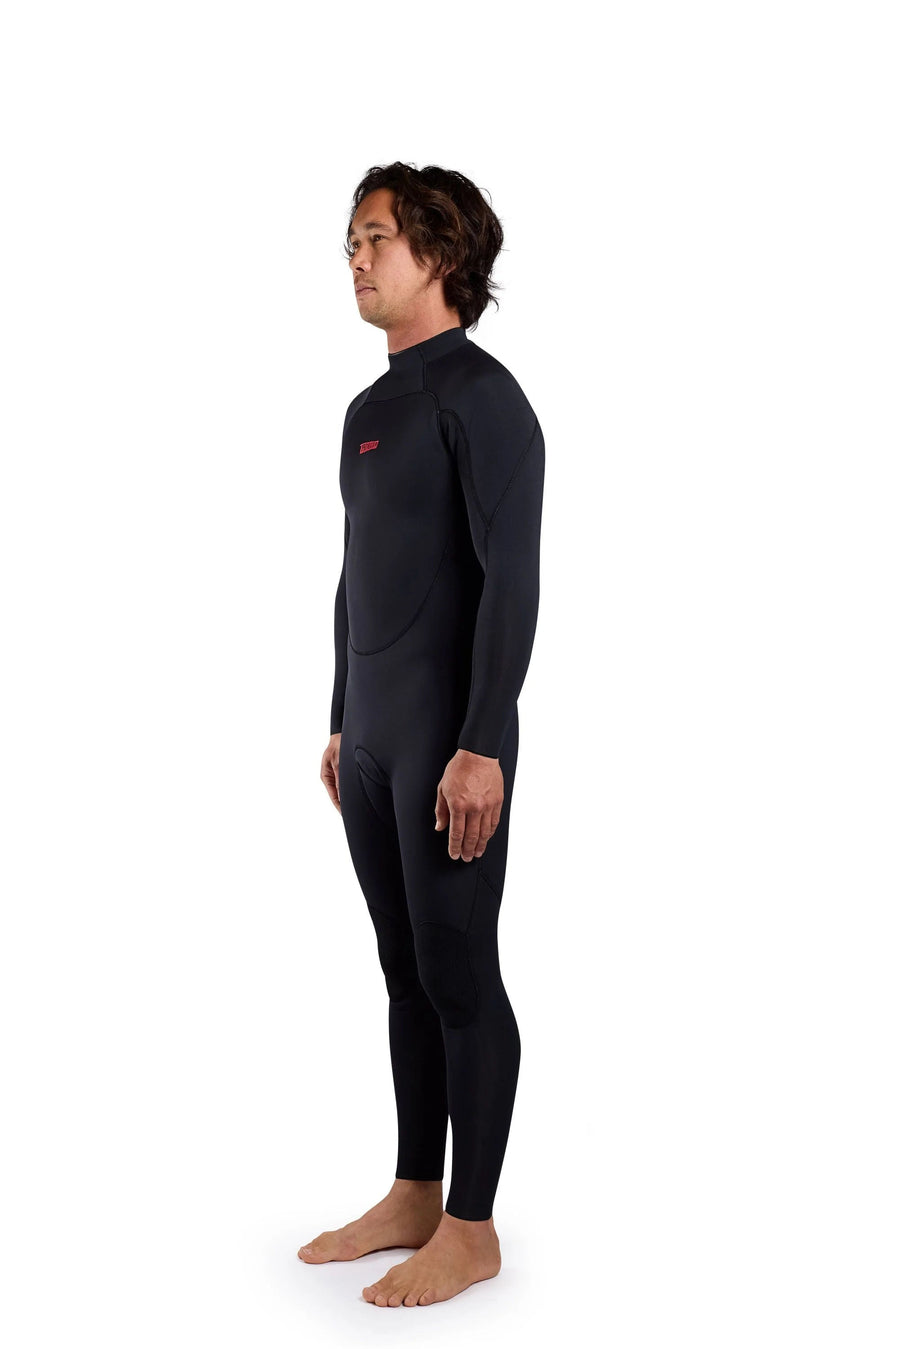 Adelio Wetsuits Apparel Adelio Ford Archbold 3/2 Back Zip  - SurfBored